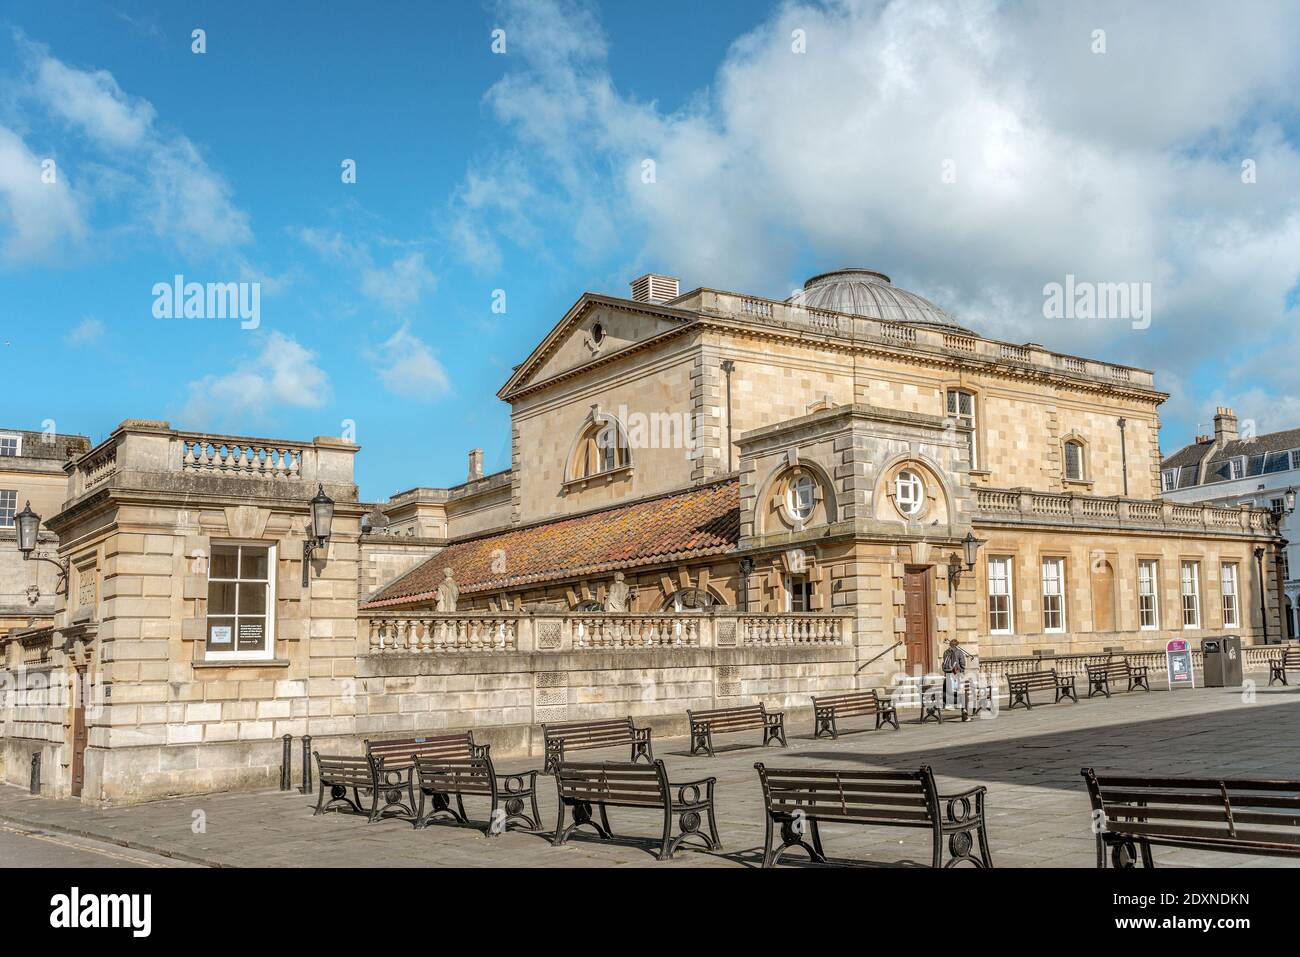 The exterior of the Roman Baths complex, in the city center of Bath, Somerset, England Stock Photo